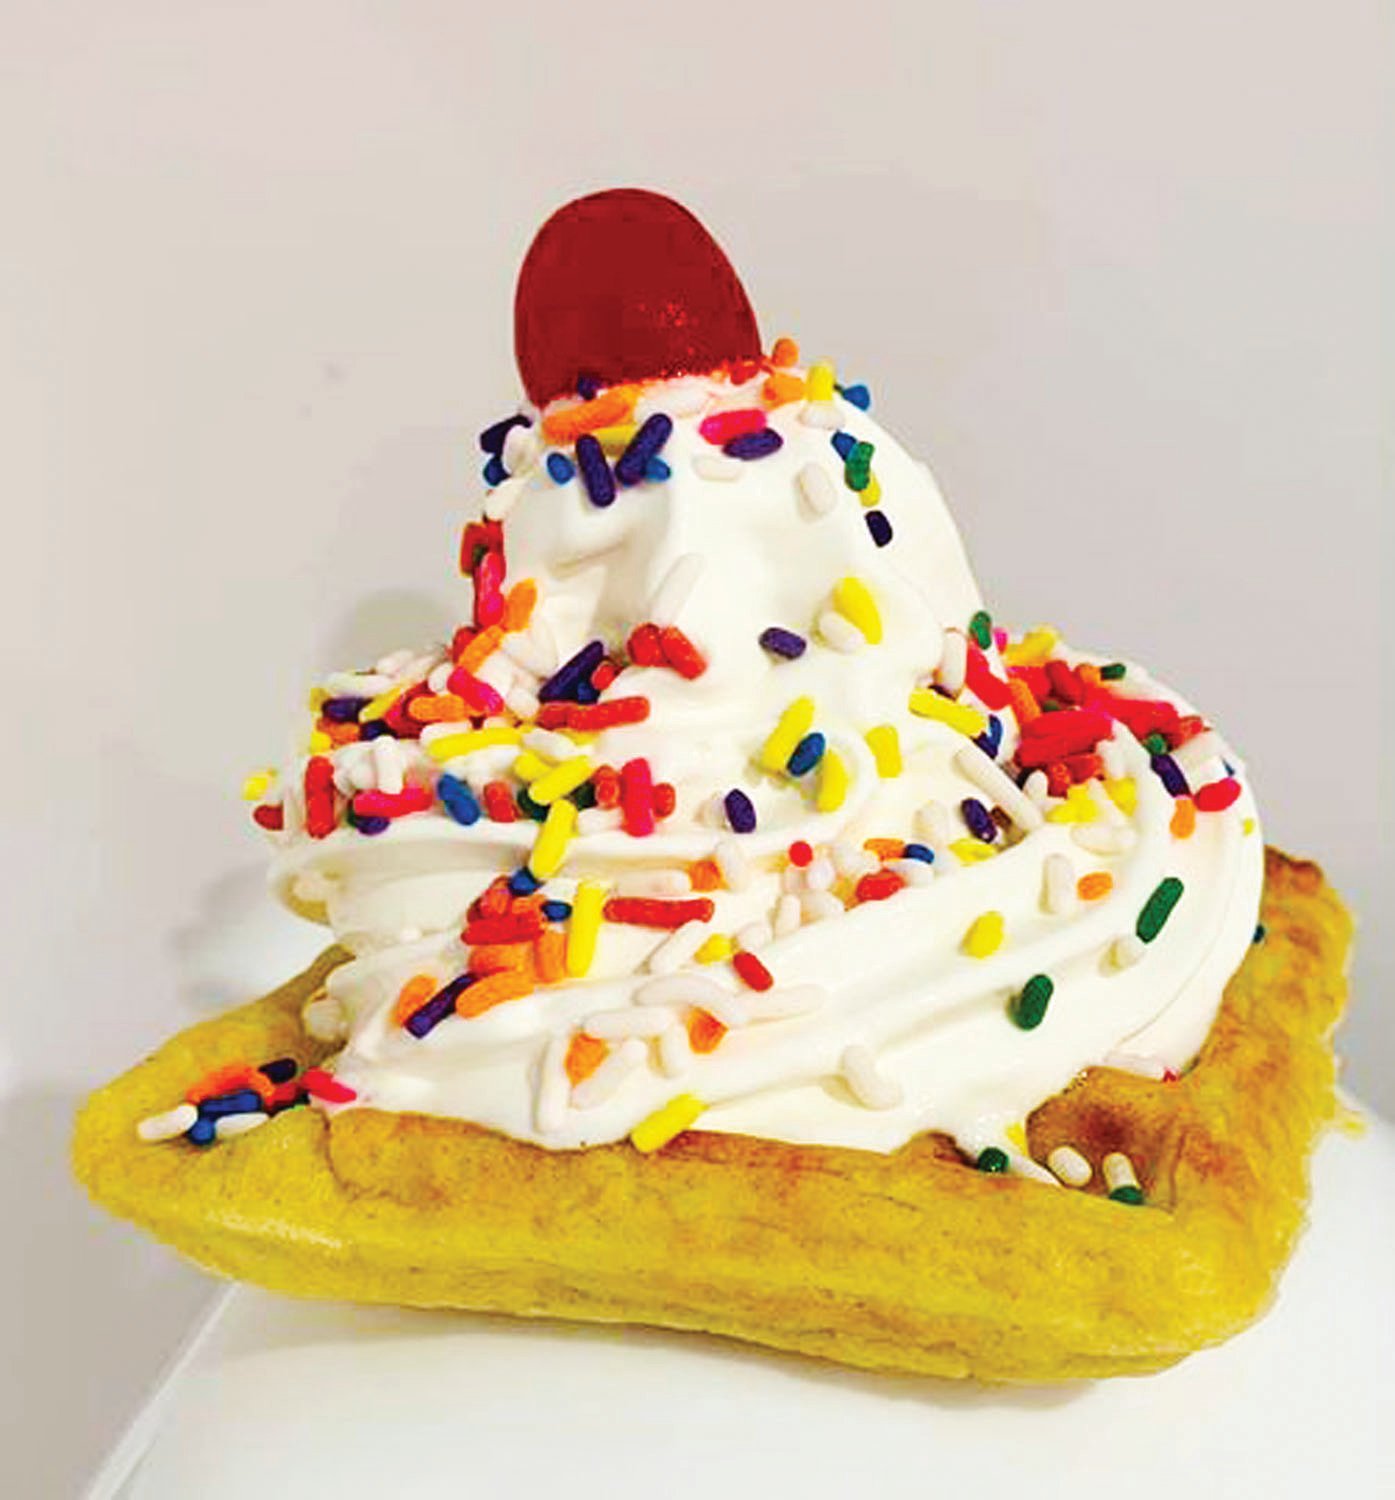 An ice cream-topped waffle was a recent special at the recently opened Grida’s 2.0 in Richlandtown. The seasonal restaurant served hard and soft-serve ice creams including seasonal flavors such as blueberry and teaberry.